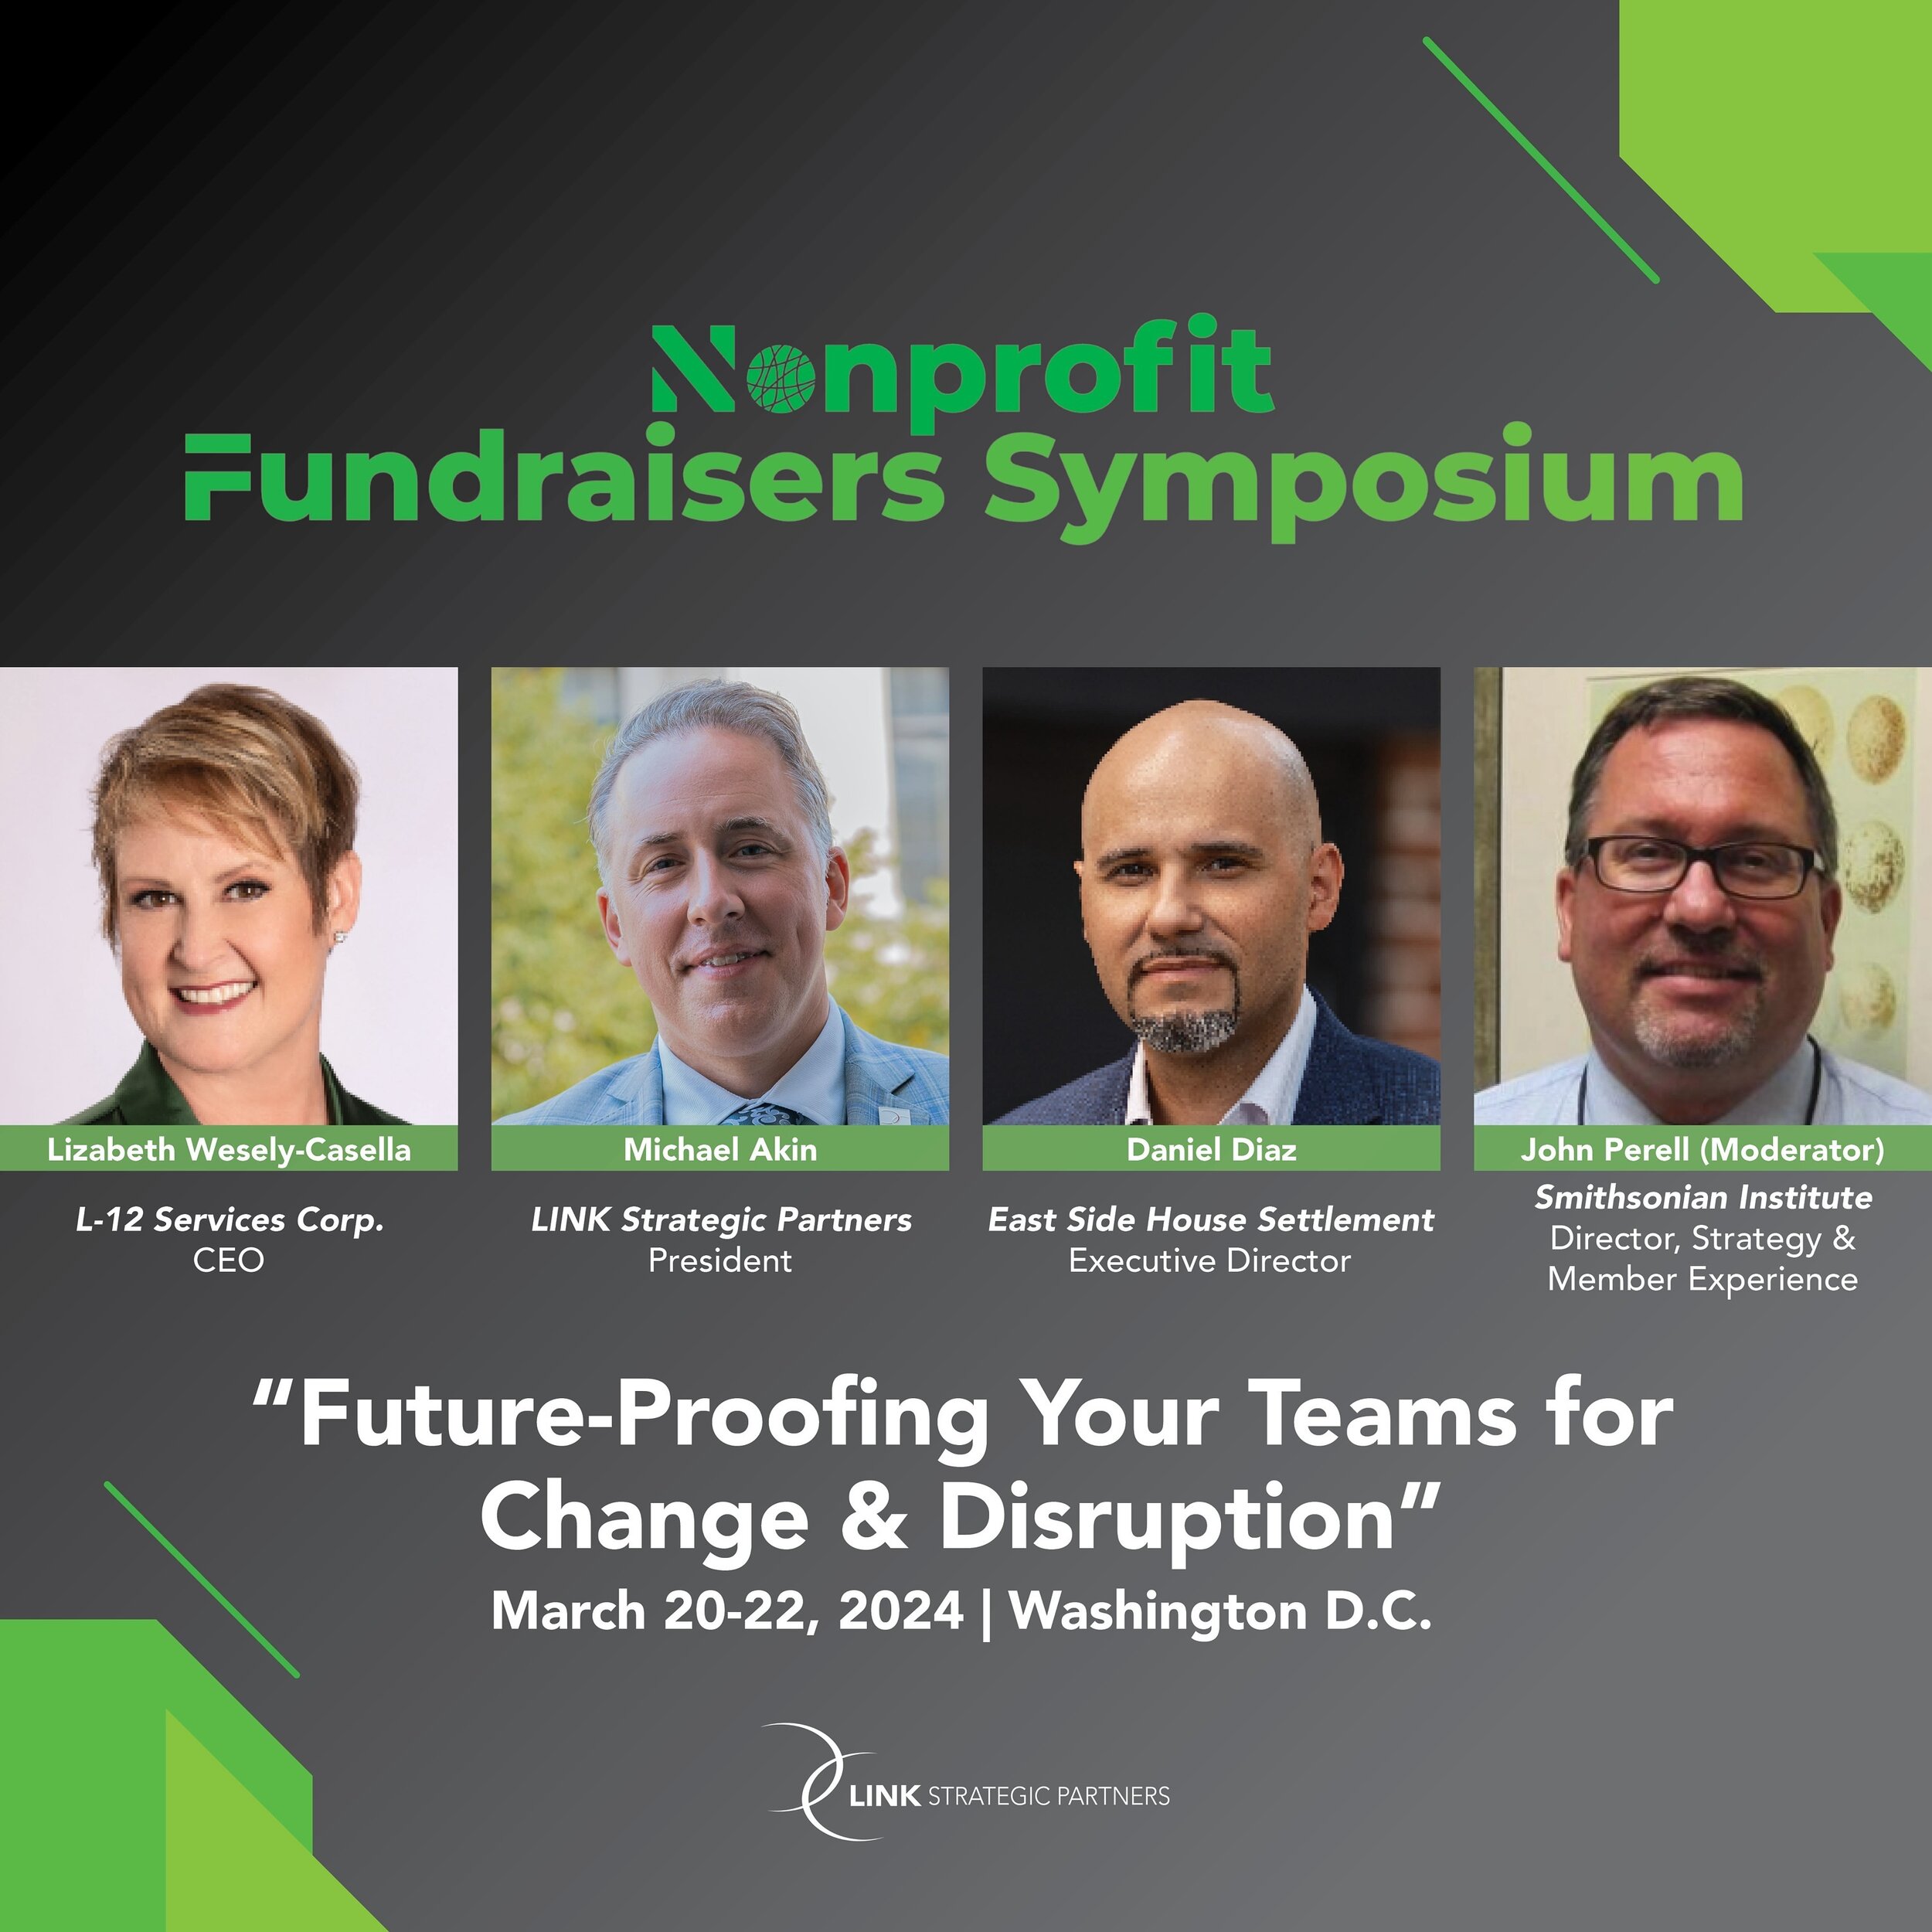 LINK is honored to present at the 2024 Annual Nonprofit Fundraisers Symposium, alongside changemakers Dan Diaz, Lizabeth Wesley-Casella, and John Perell.

With a focus on the importance of building resilient teams, born from a culture of trust and be